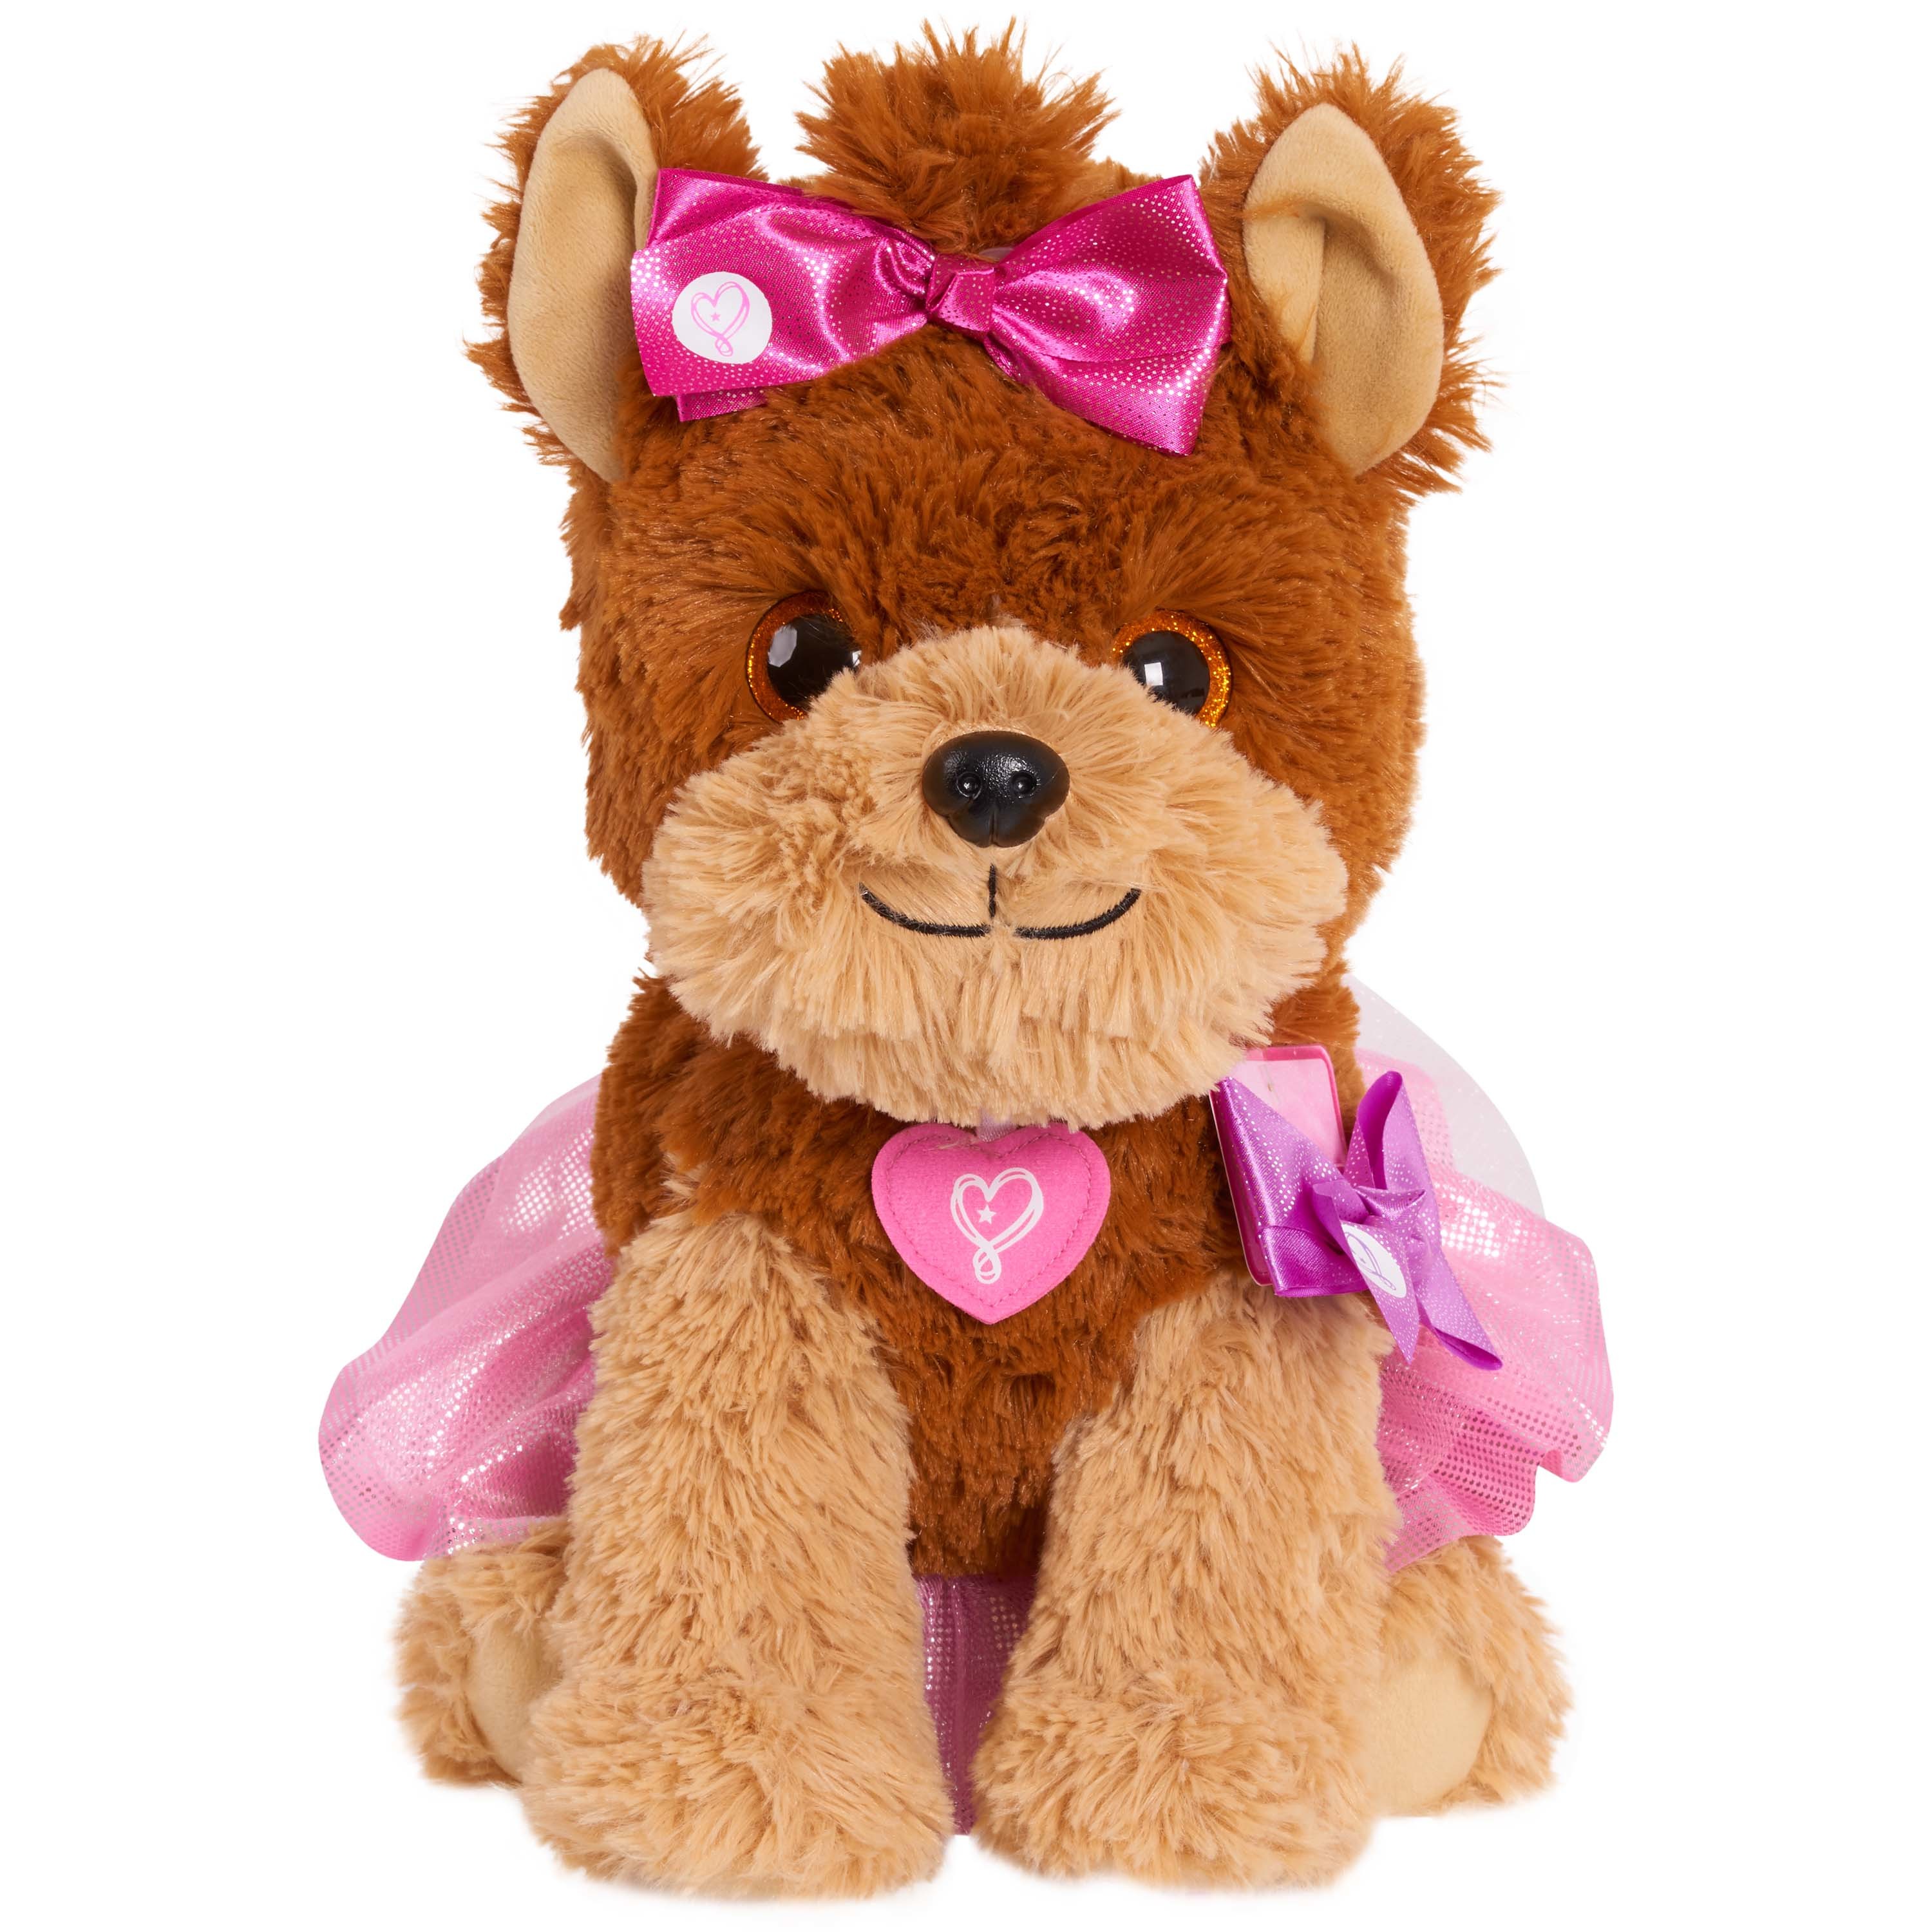 JoJo Siwa Jumbo BowBow Plush,  Kids Toys for Ages 3 Up, Gifts and Presents - image 1 of 4